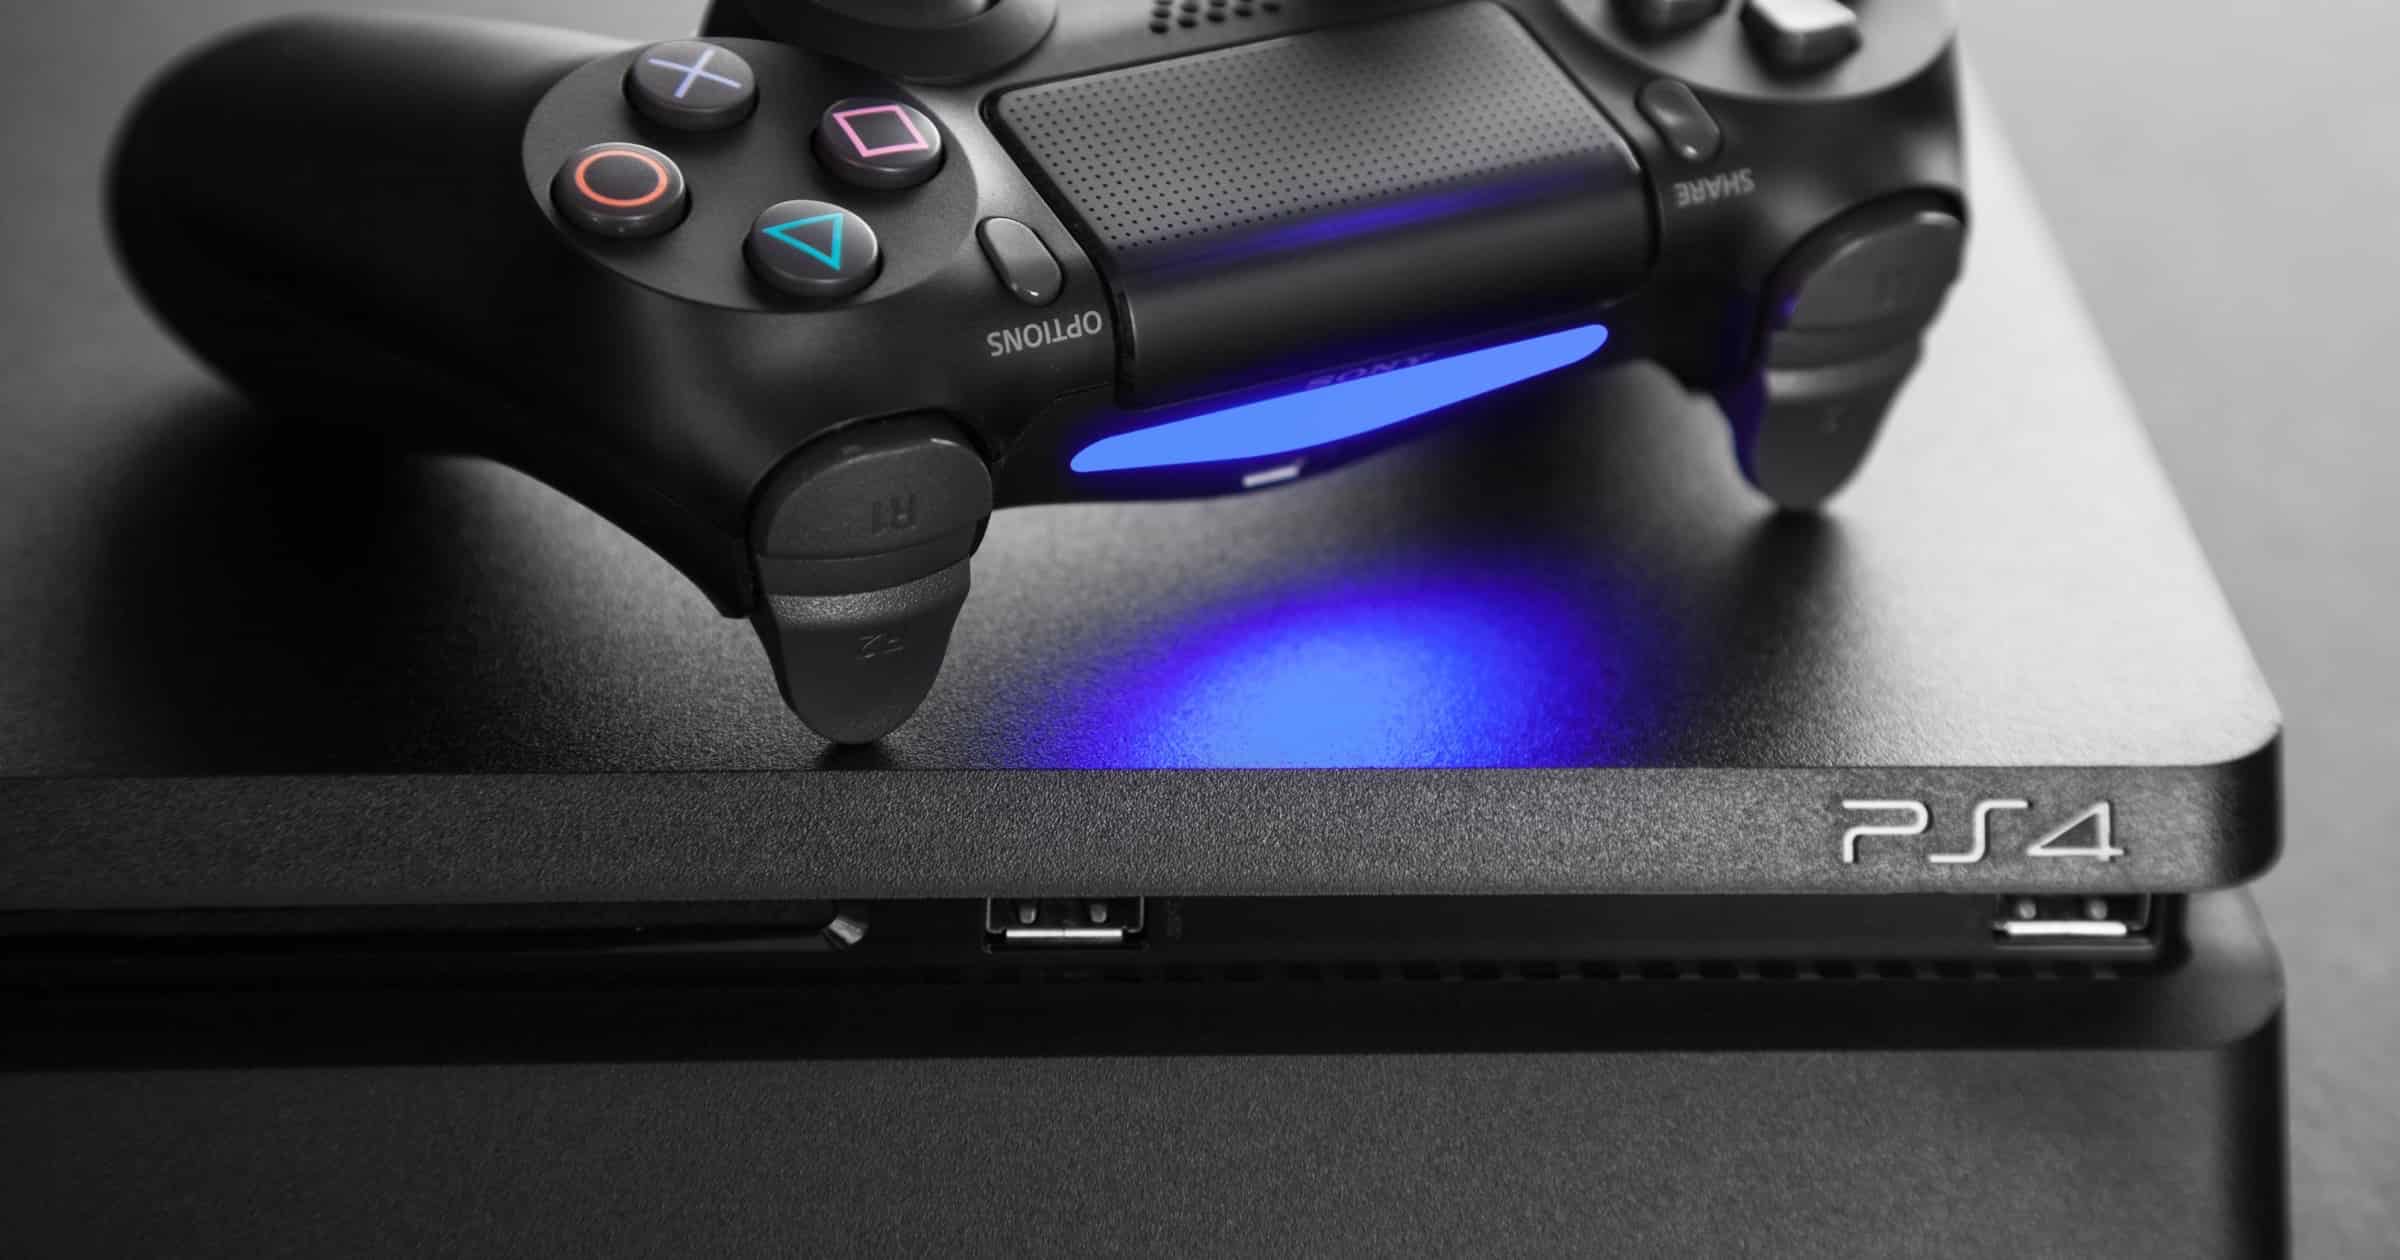 Sony PS4 Update Will Monitor Your Party Chats